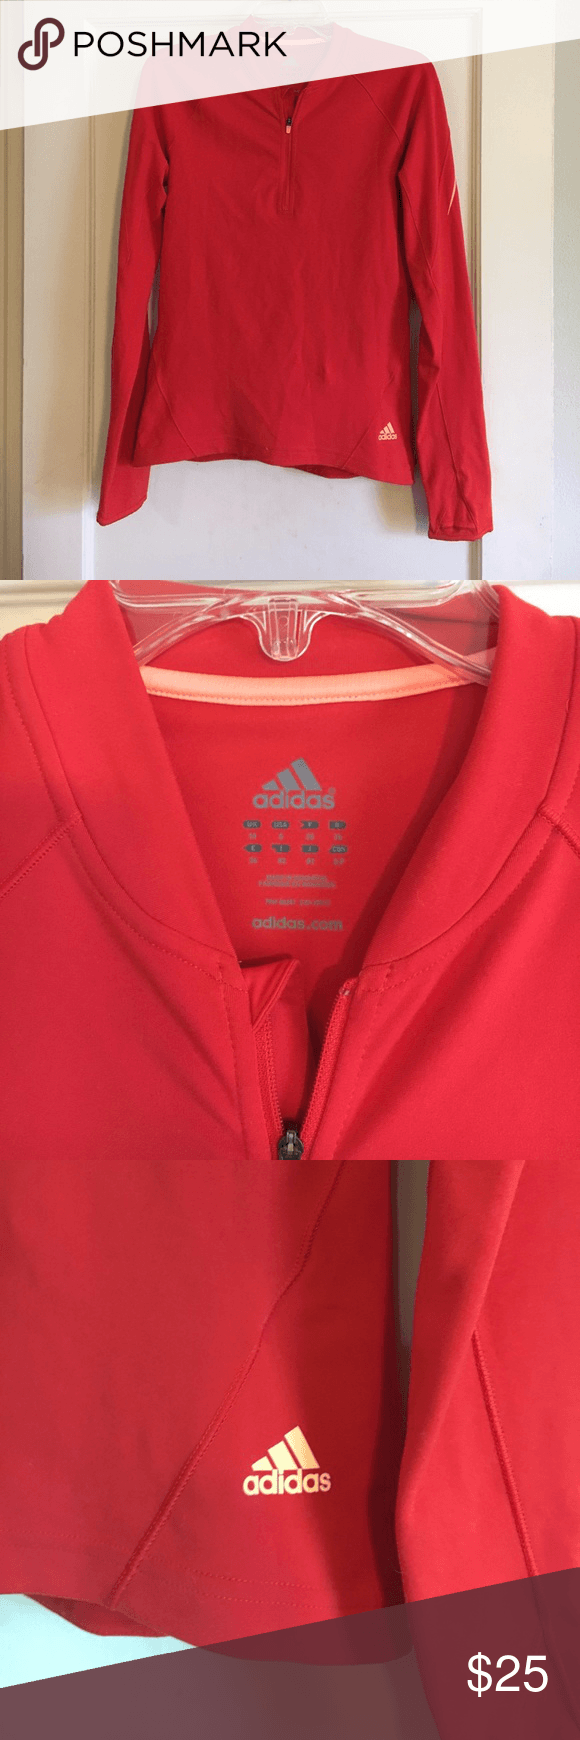 Red and Peach Logo - Adidas jogging shirt Poppy red with peach accent logo and stripe